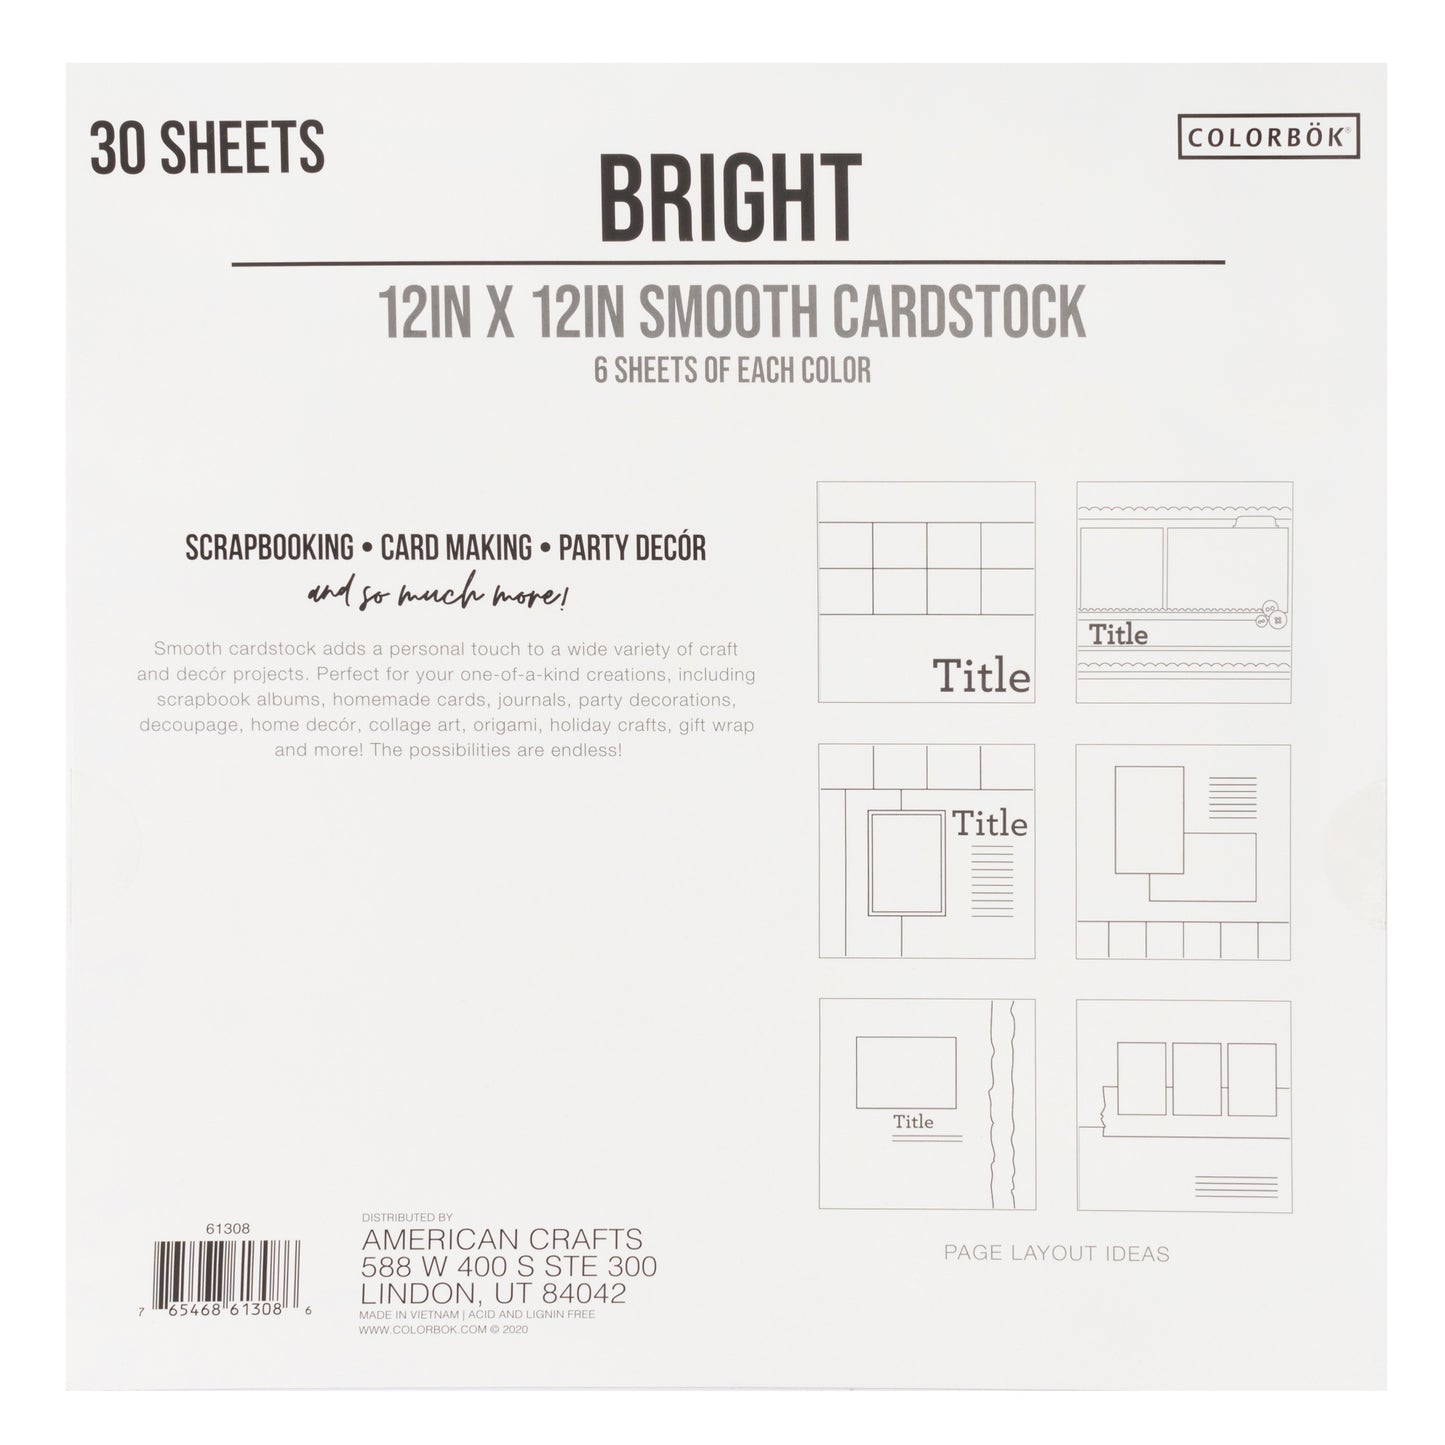 Colorbok 78lb Smooth Cardstock 12"X12" 30/Pkg-Bright, 5 Colors/6 Each